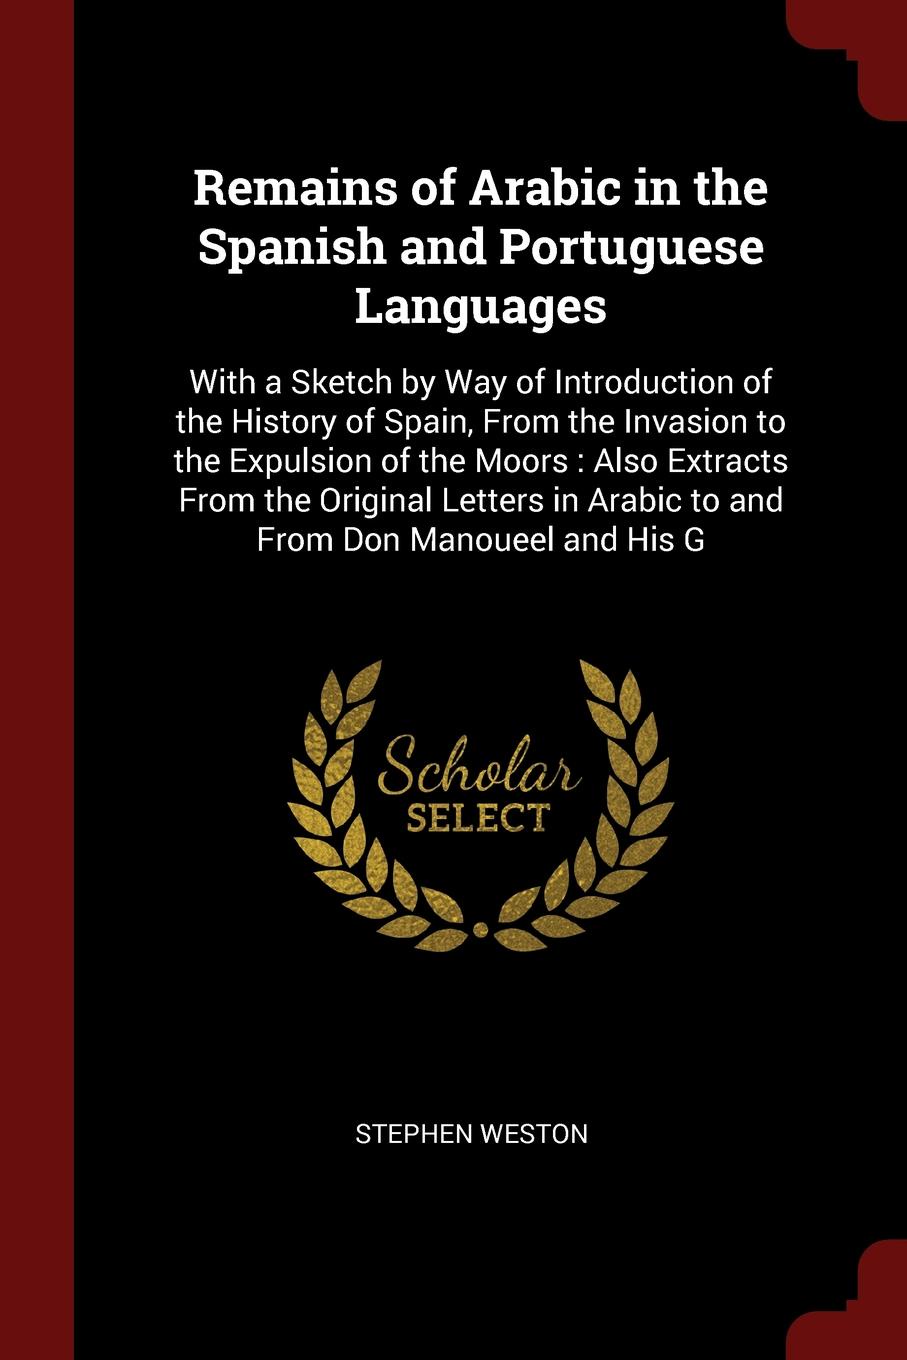 Remains of Arabic in the Spanish and Portuguese Languages. With a Sketch by Way of Introduction of the History of Spain, From the Invasion to the Expulsion of the Moors : Also Extracts From the Original Letters in Arabic to and From Don Manoueel a...